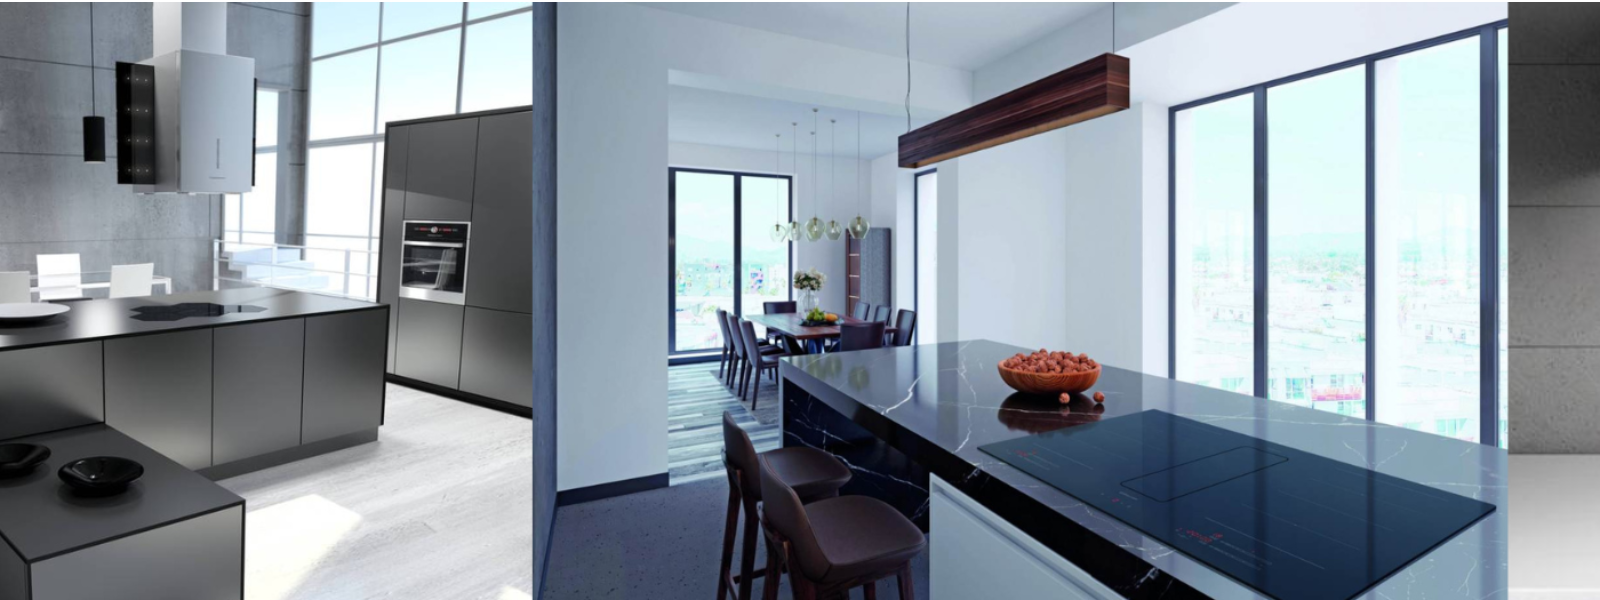 VIK AV OÜ - We offer a comprehensive range of kitchen and bathroom products to improve home functionality.